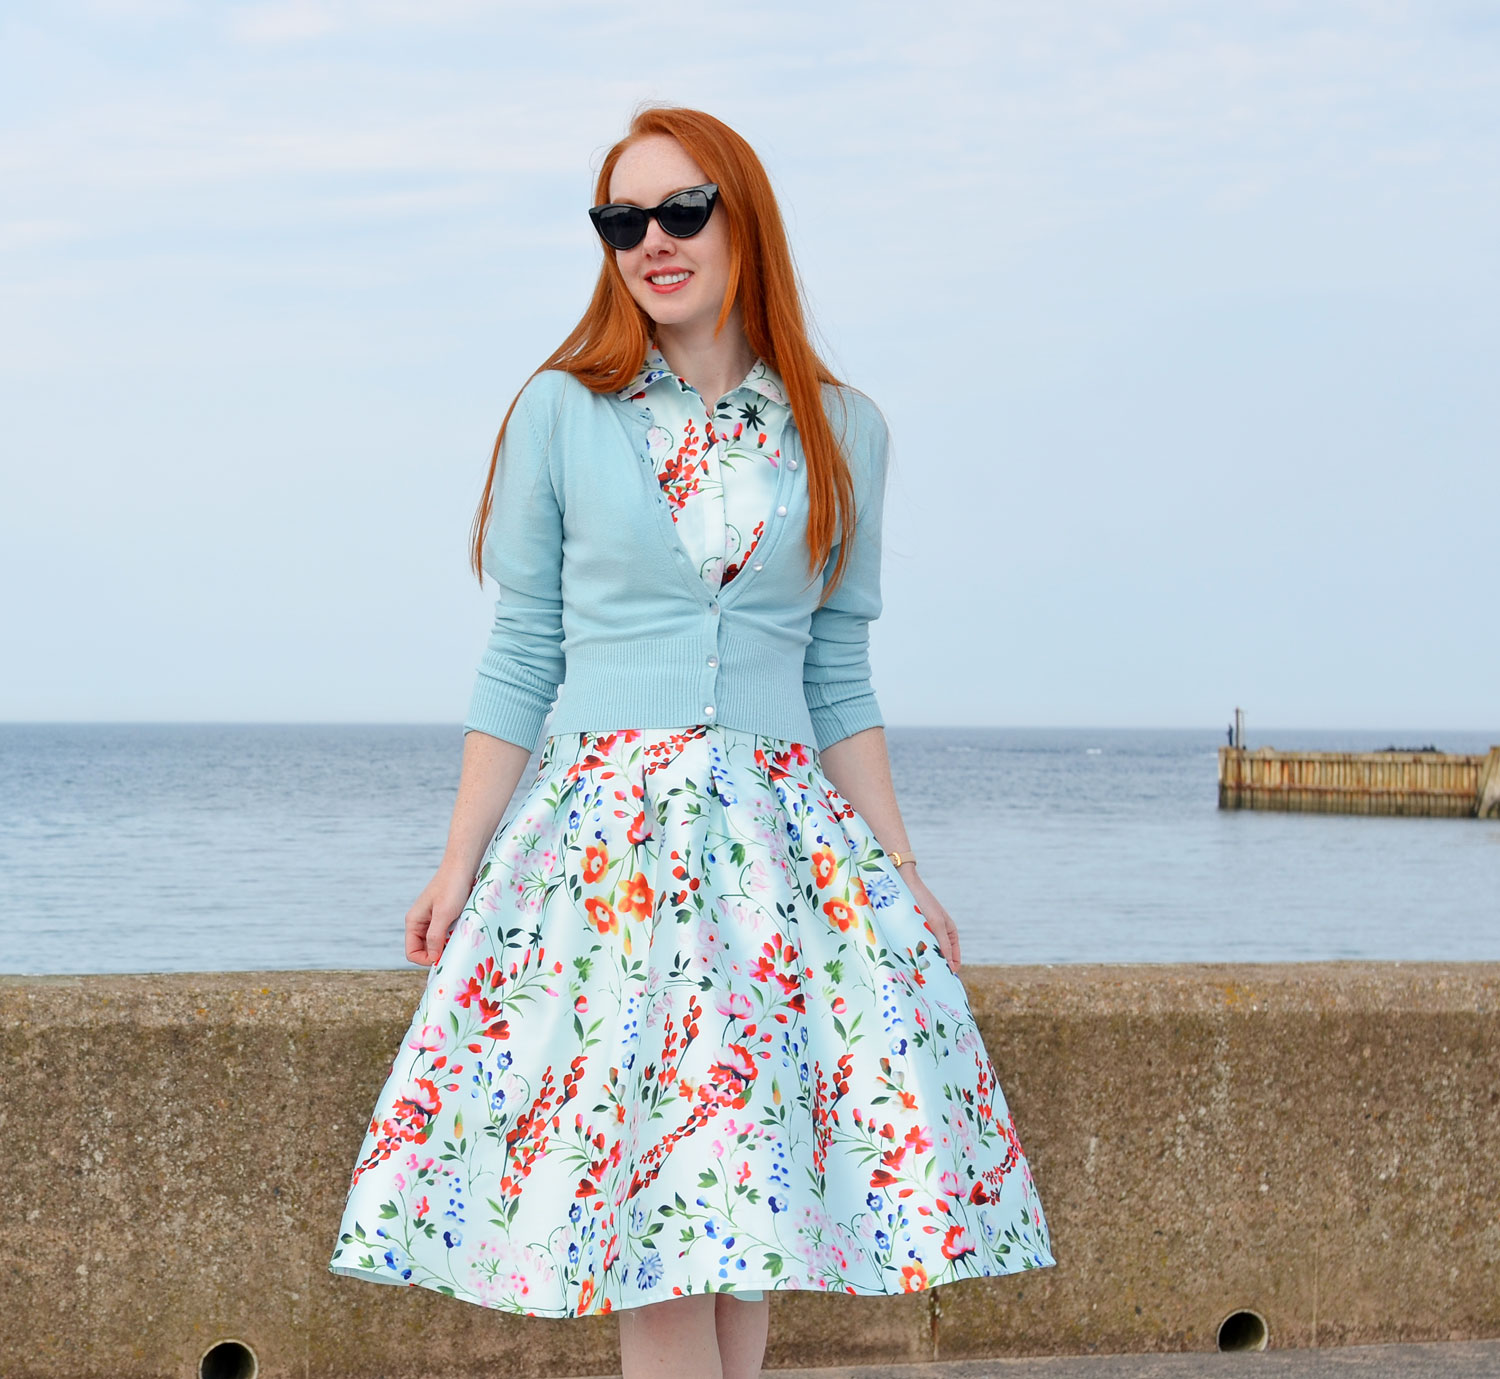 Chi Chi London 'Nora' floral dress worn with blue Hell Bunny cardigan and Kurt Geiger flats